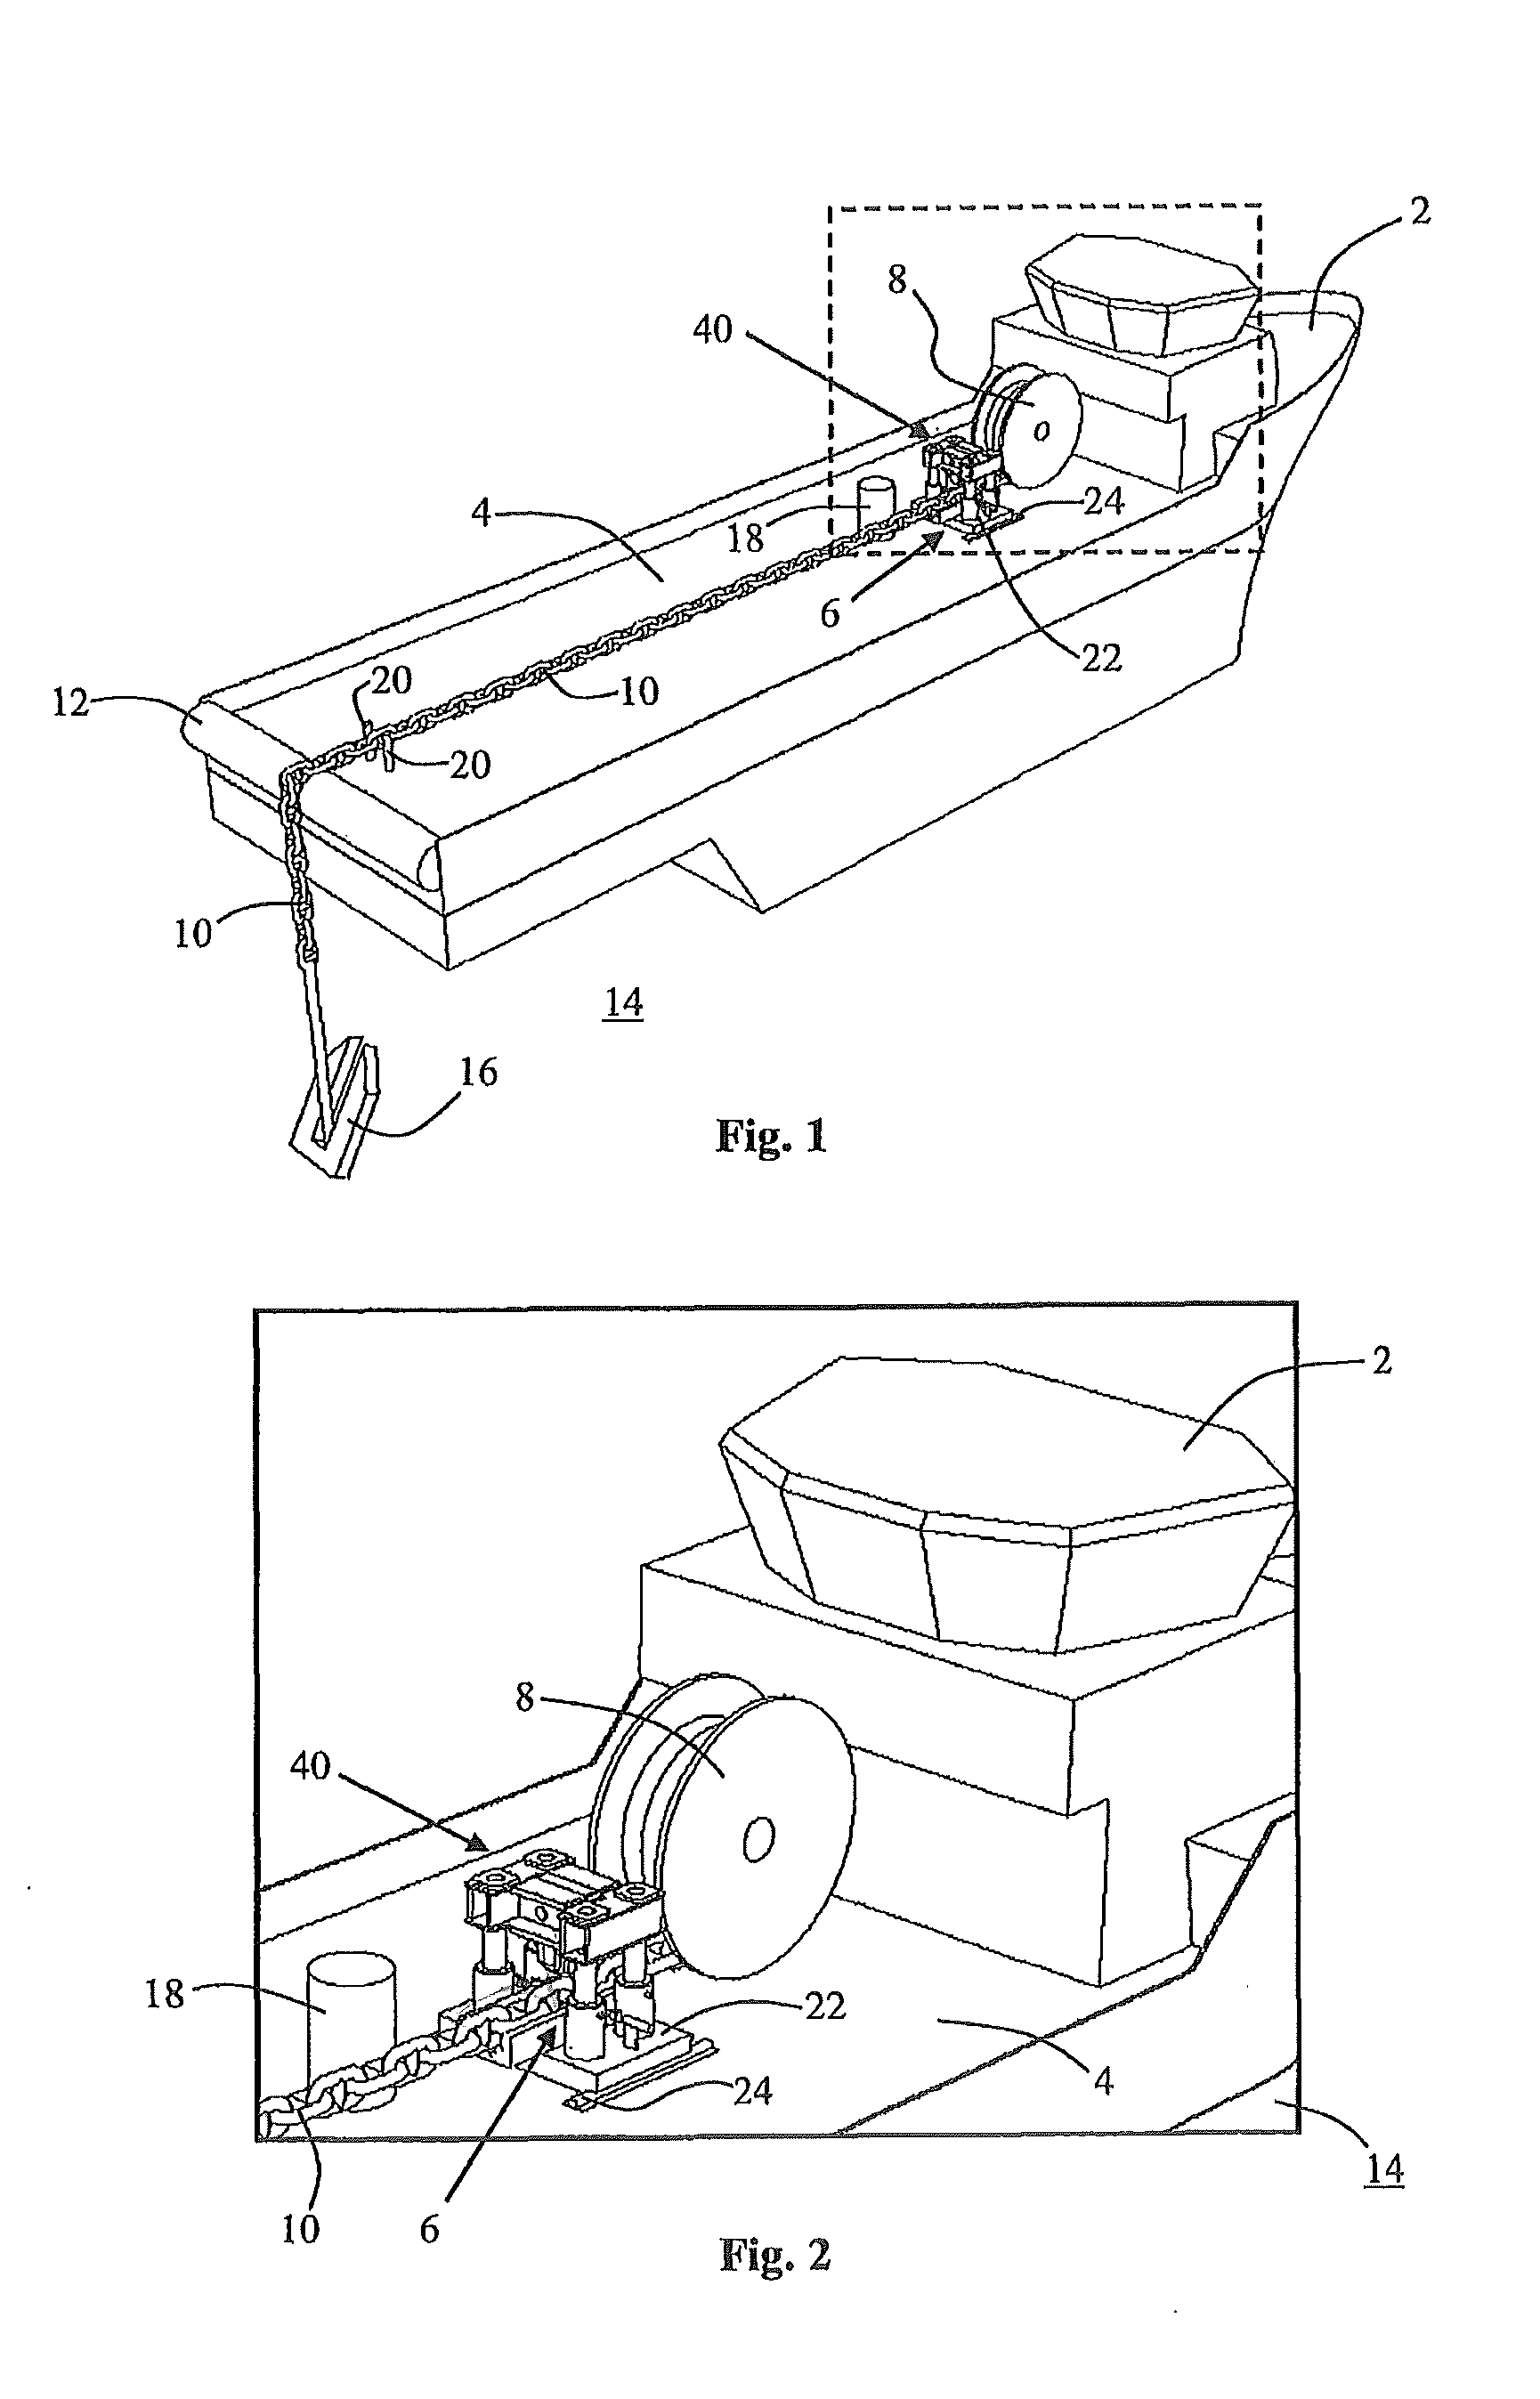 Cutting Device, Method and Use for Cutting of a Line Extending from a Floating Vessel